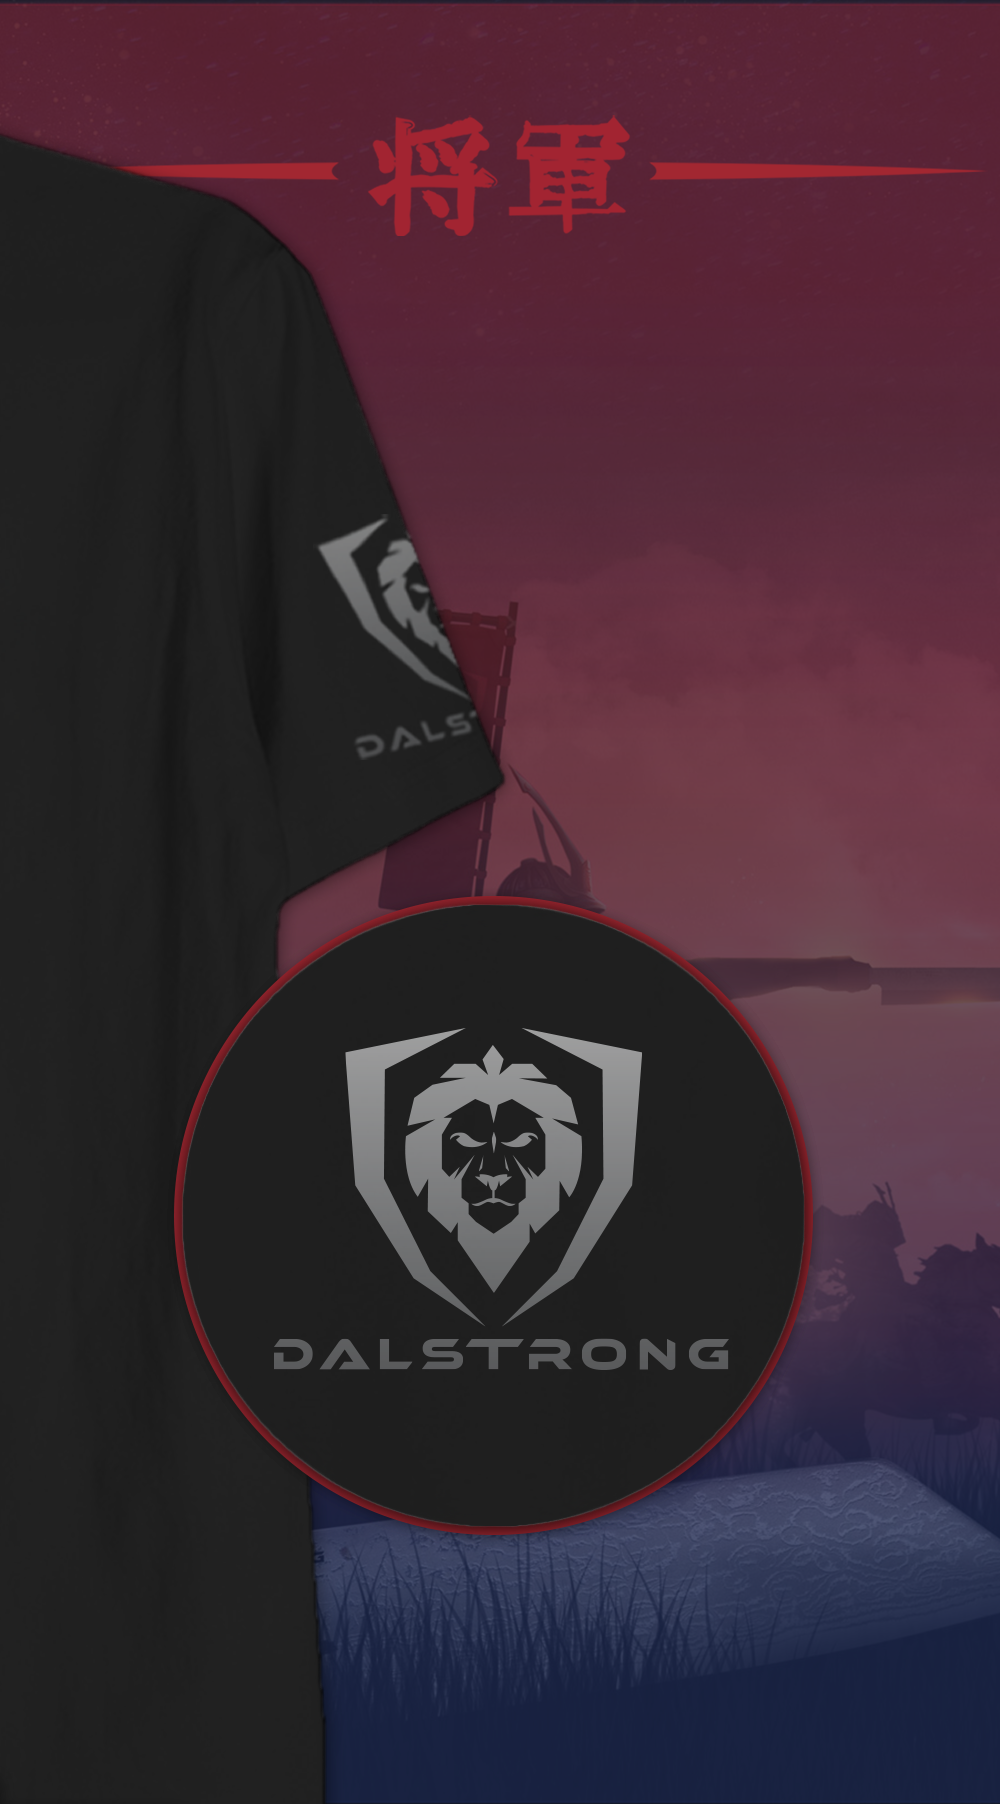 Dalstrong the shogun series regal warrior tee black with dalstrong name and logo.